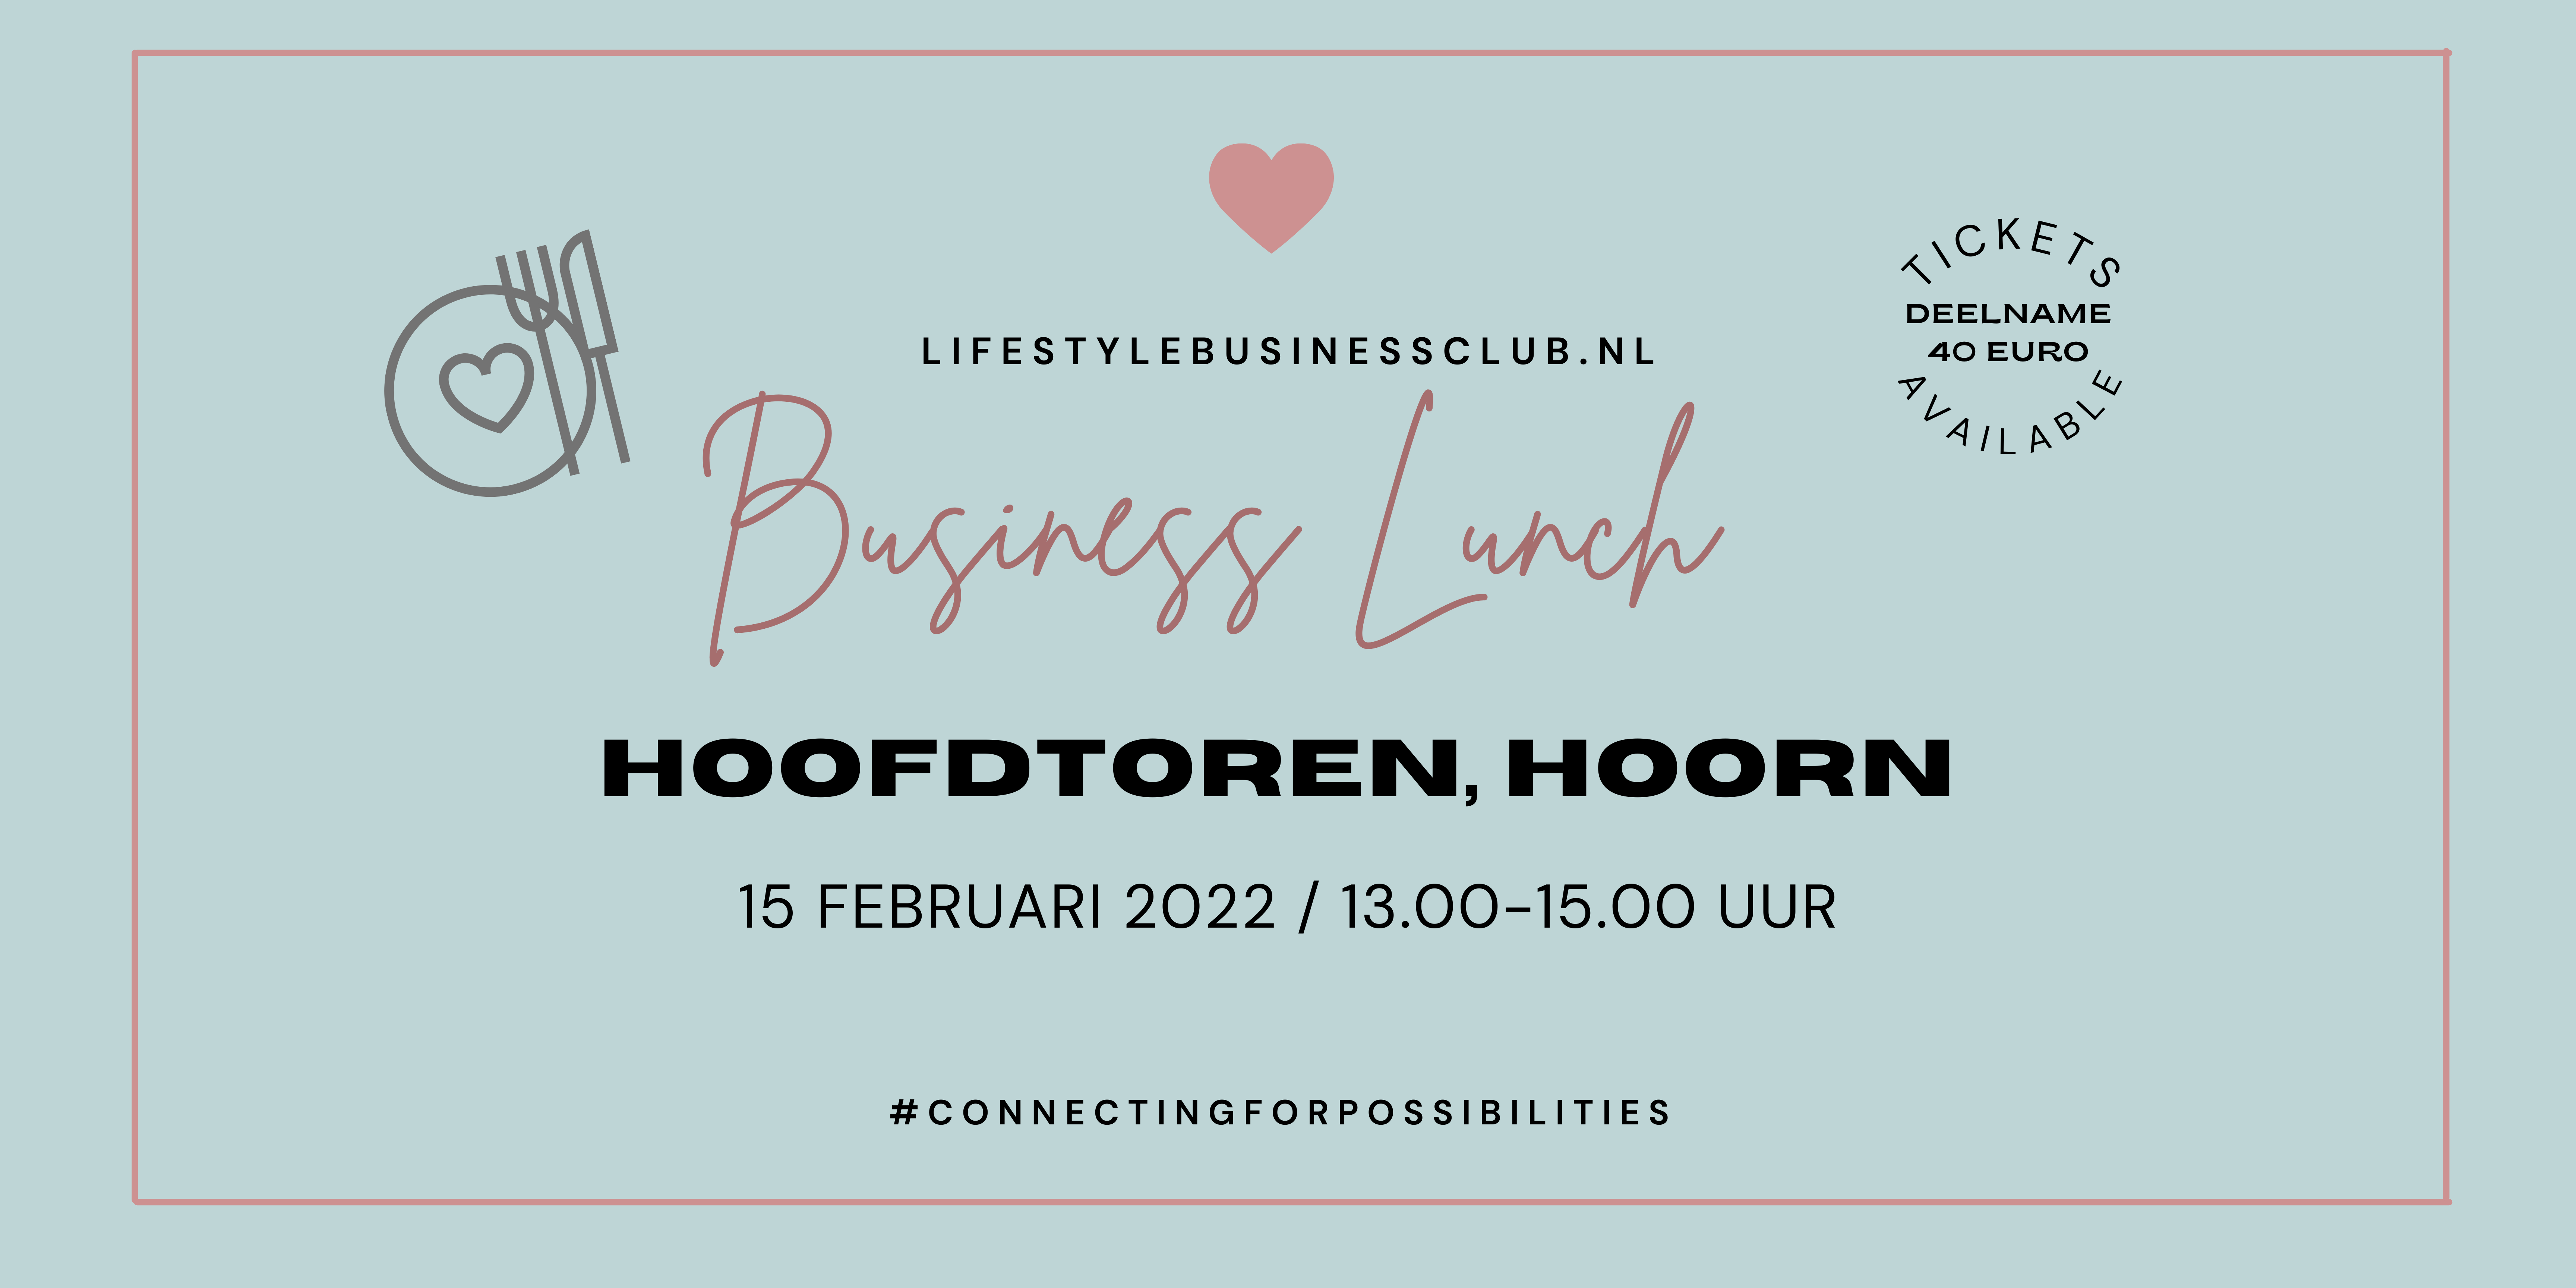 Lifestyle Business Lunch Hoorn